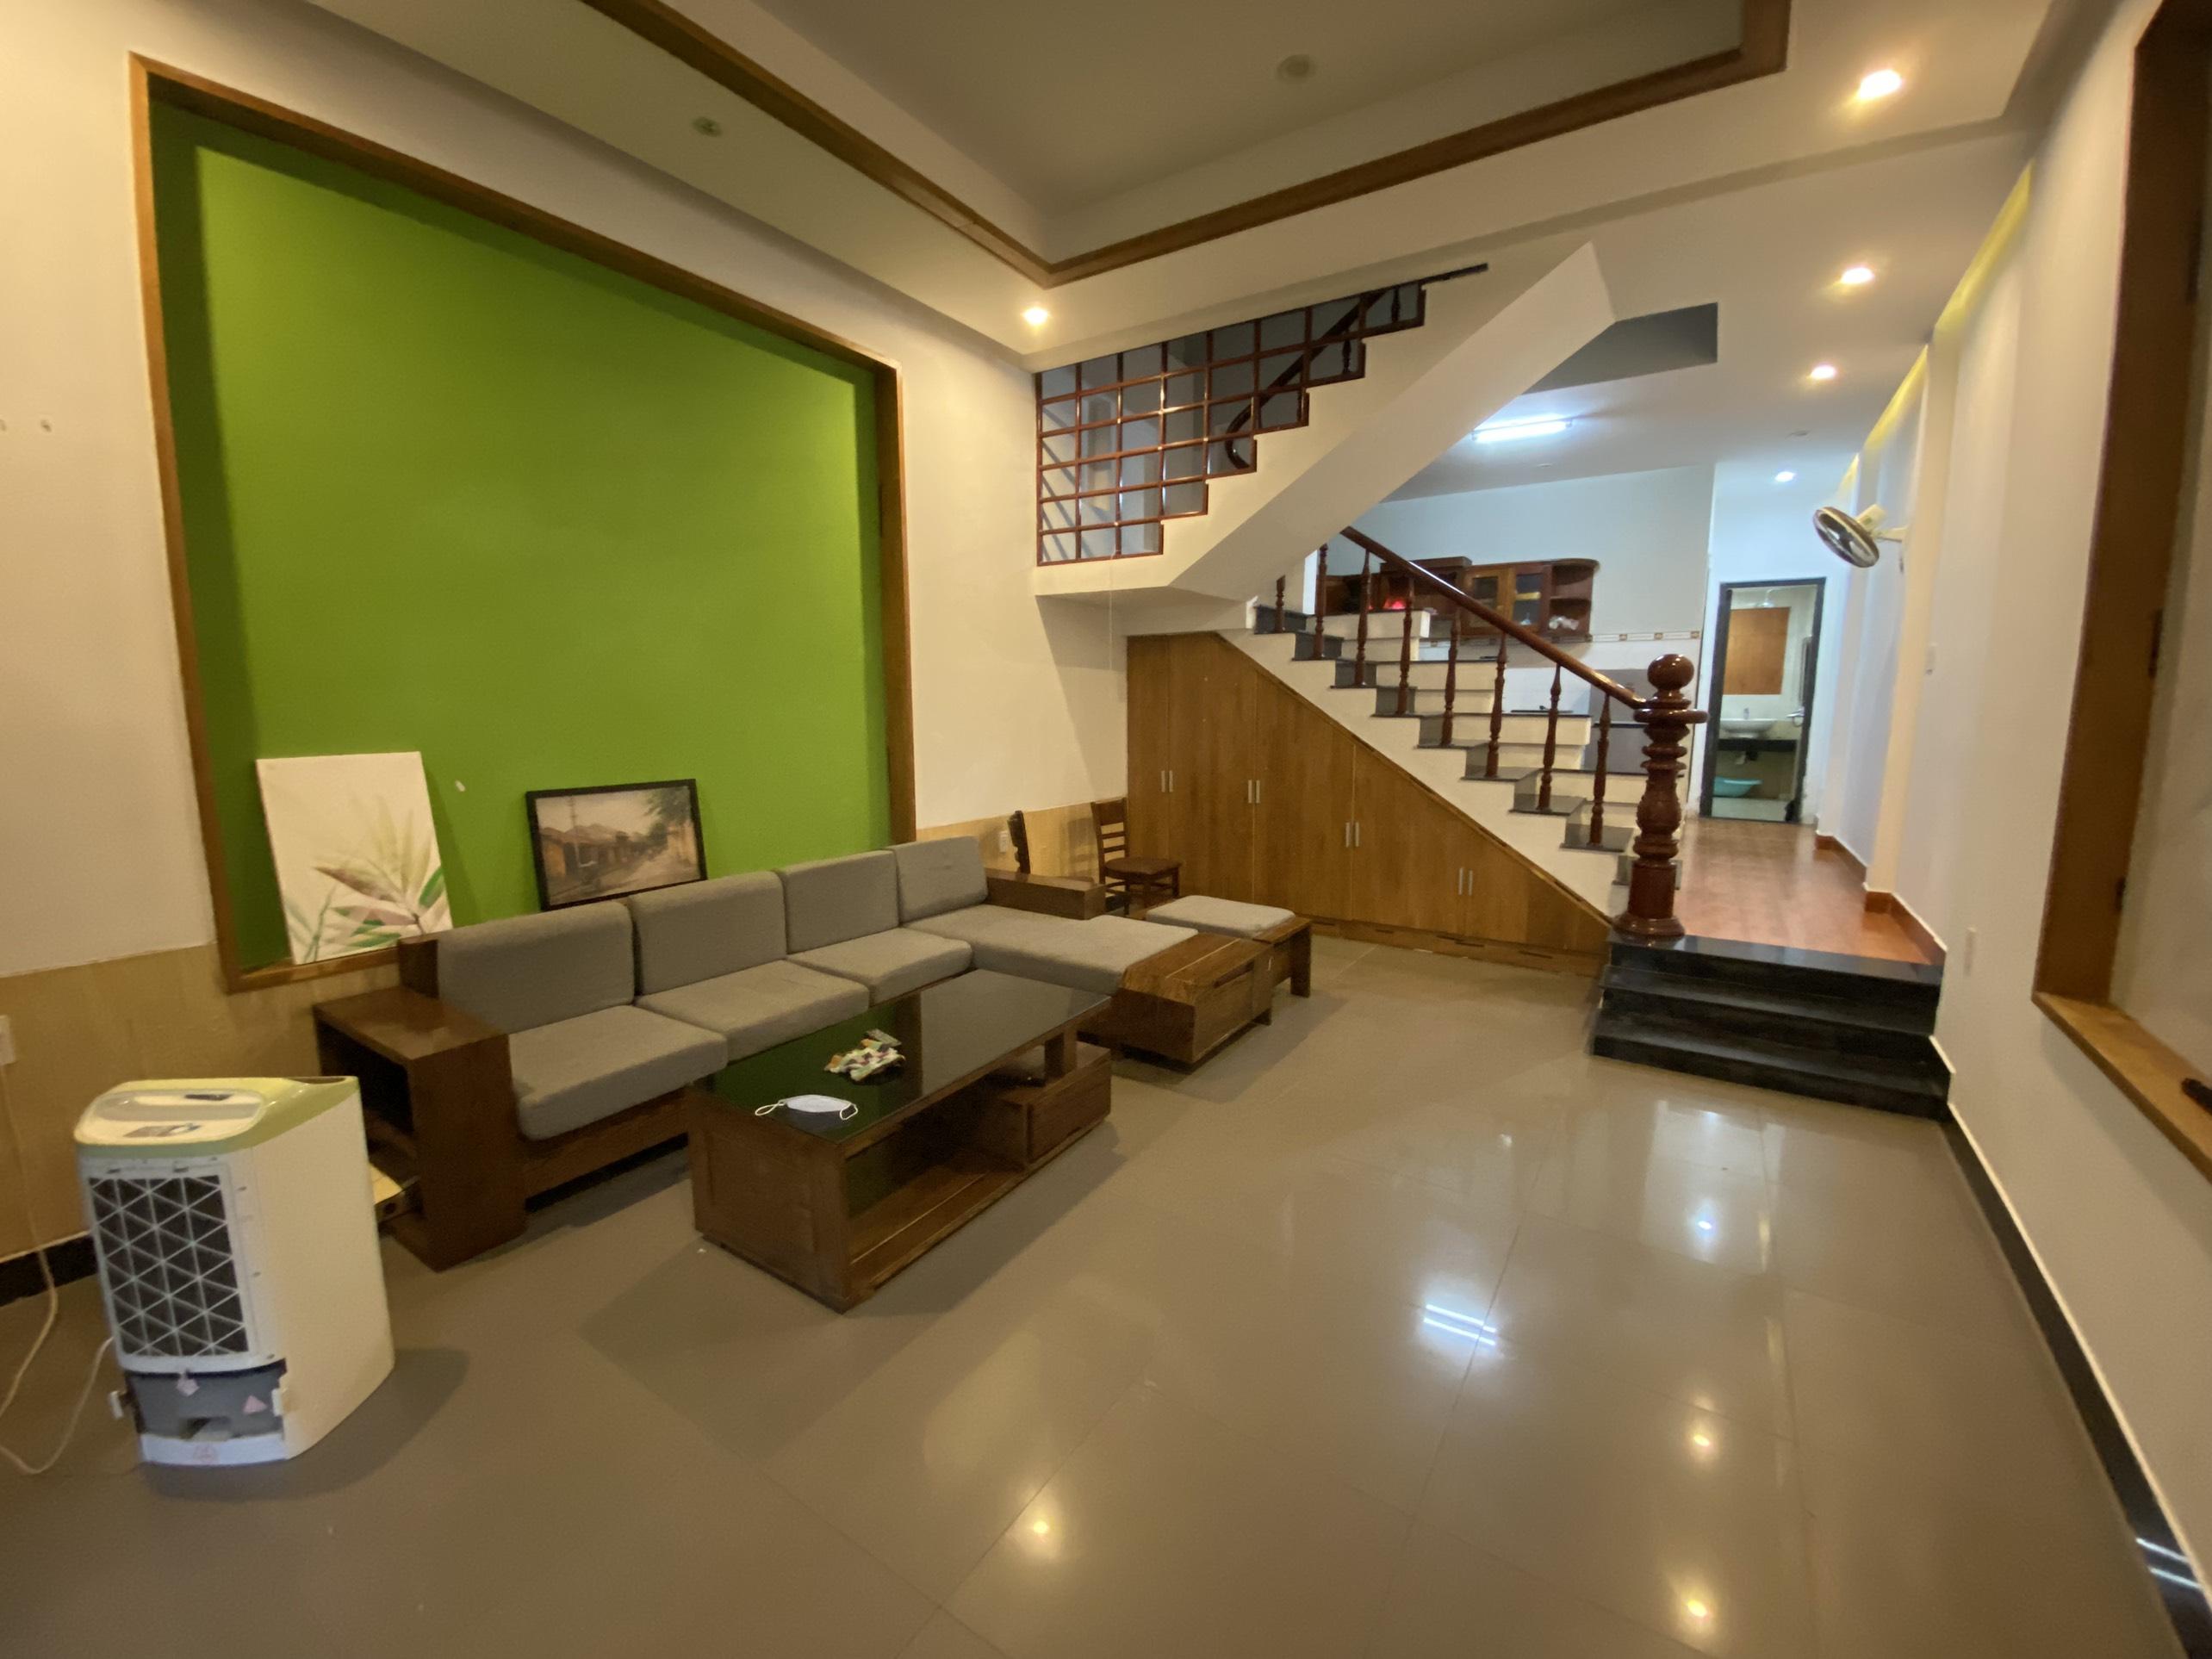 3-Bedroom House in An Thuong area for rent